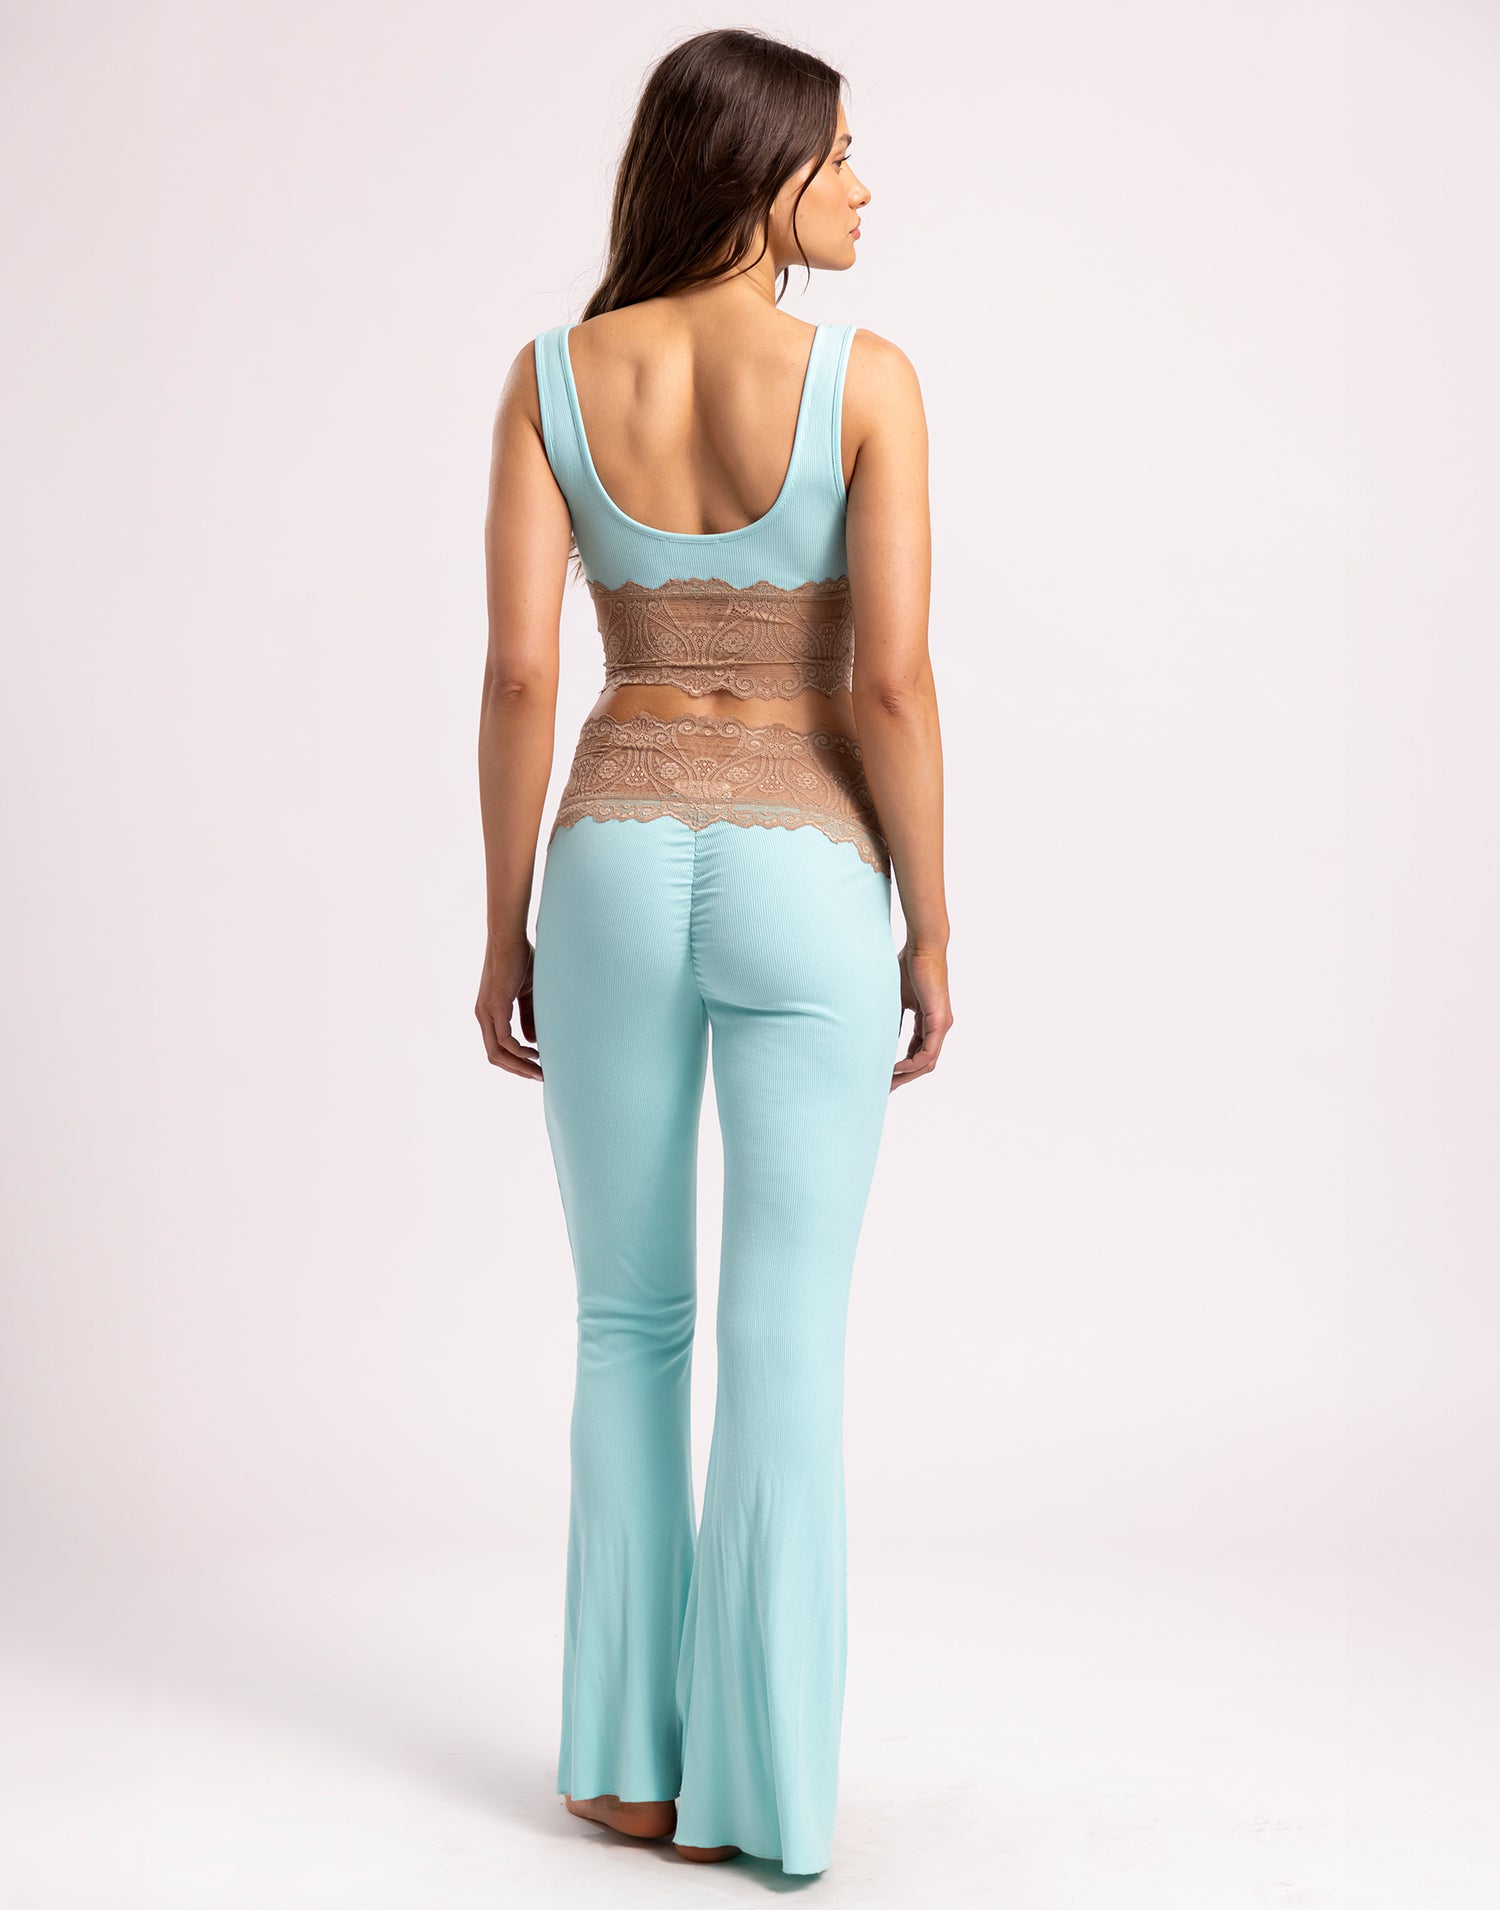 Anise Lounge Tank Top in Aqua with Delicate Lace Trim - Back View